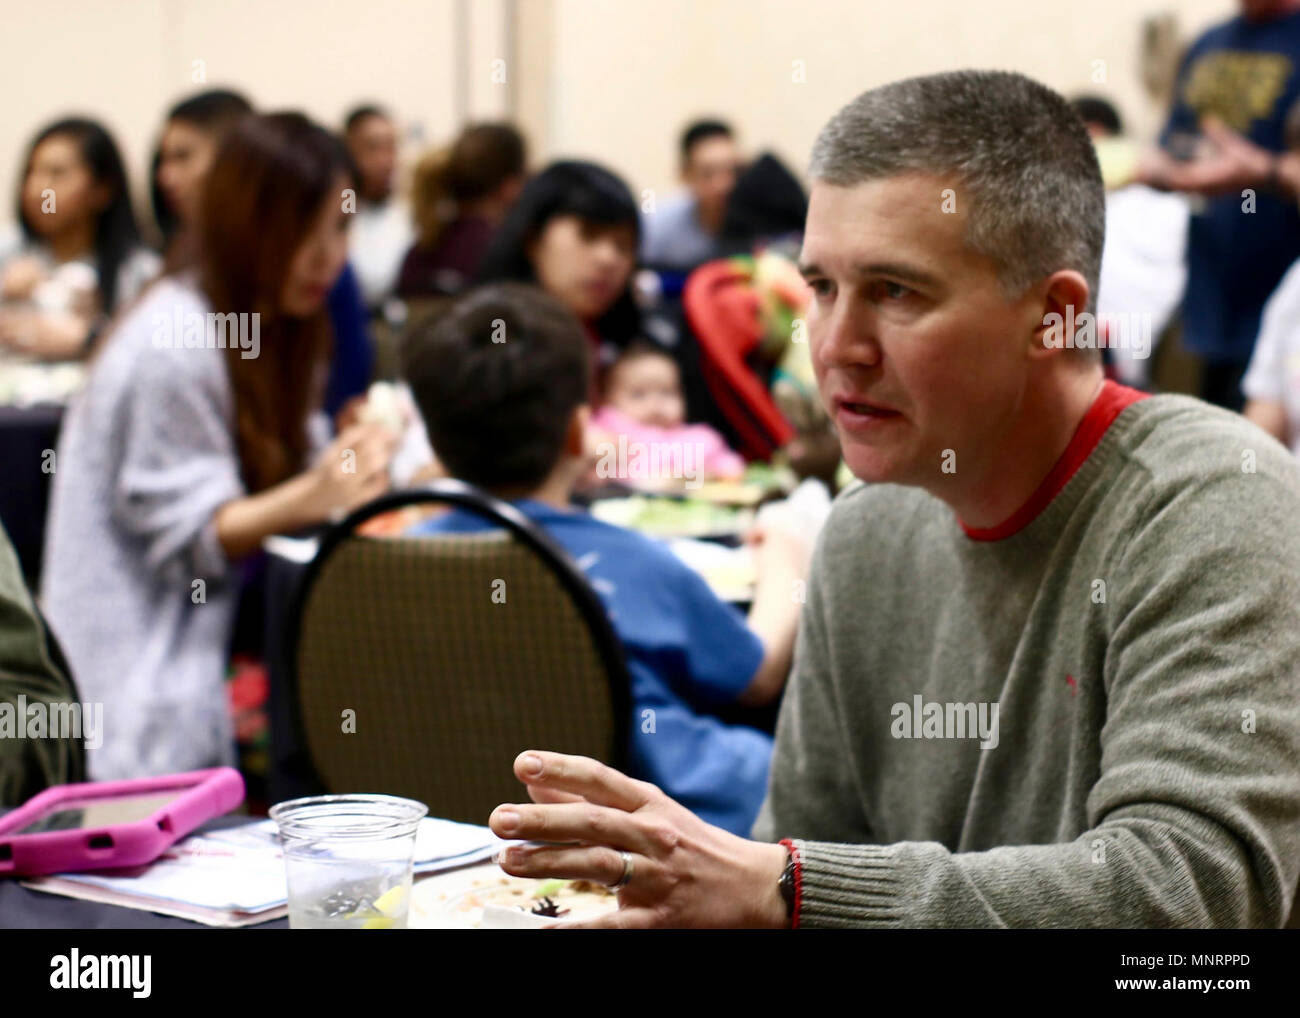 KANSAS CITY, Missouri — Maj. Chris Weinrich, chaplain for 1st Infantry Division Artillery from Saint Louis, Missouri, talks with couples about the different love languages at the DIVARTY Strong Bonds event in Kansas City, Missouri, March 3, 2018. Weinrich mingled with everyone during lunch, offering advice and involving the whole family. (Spc. Berta Morales, 19th Public Affairs Detachment) Stock Photo